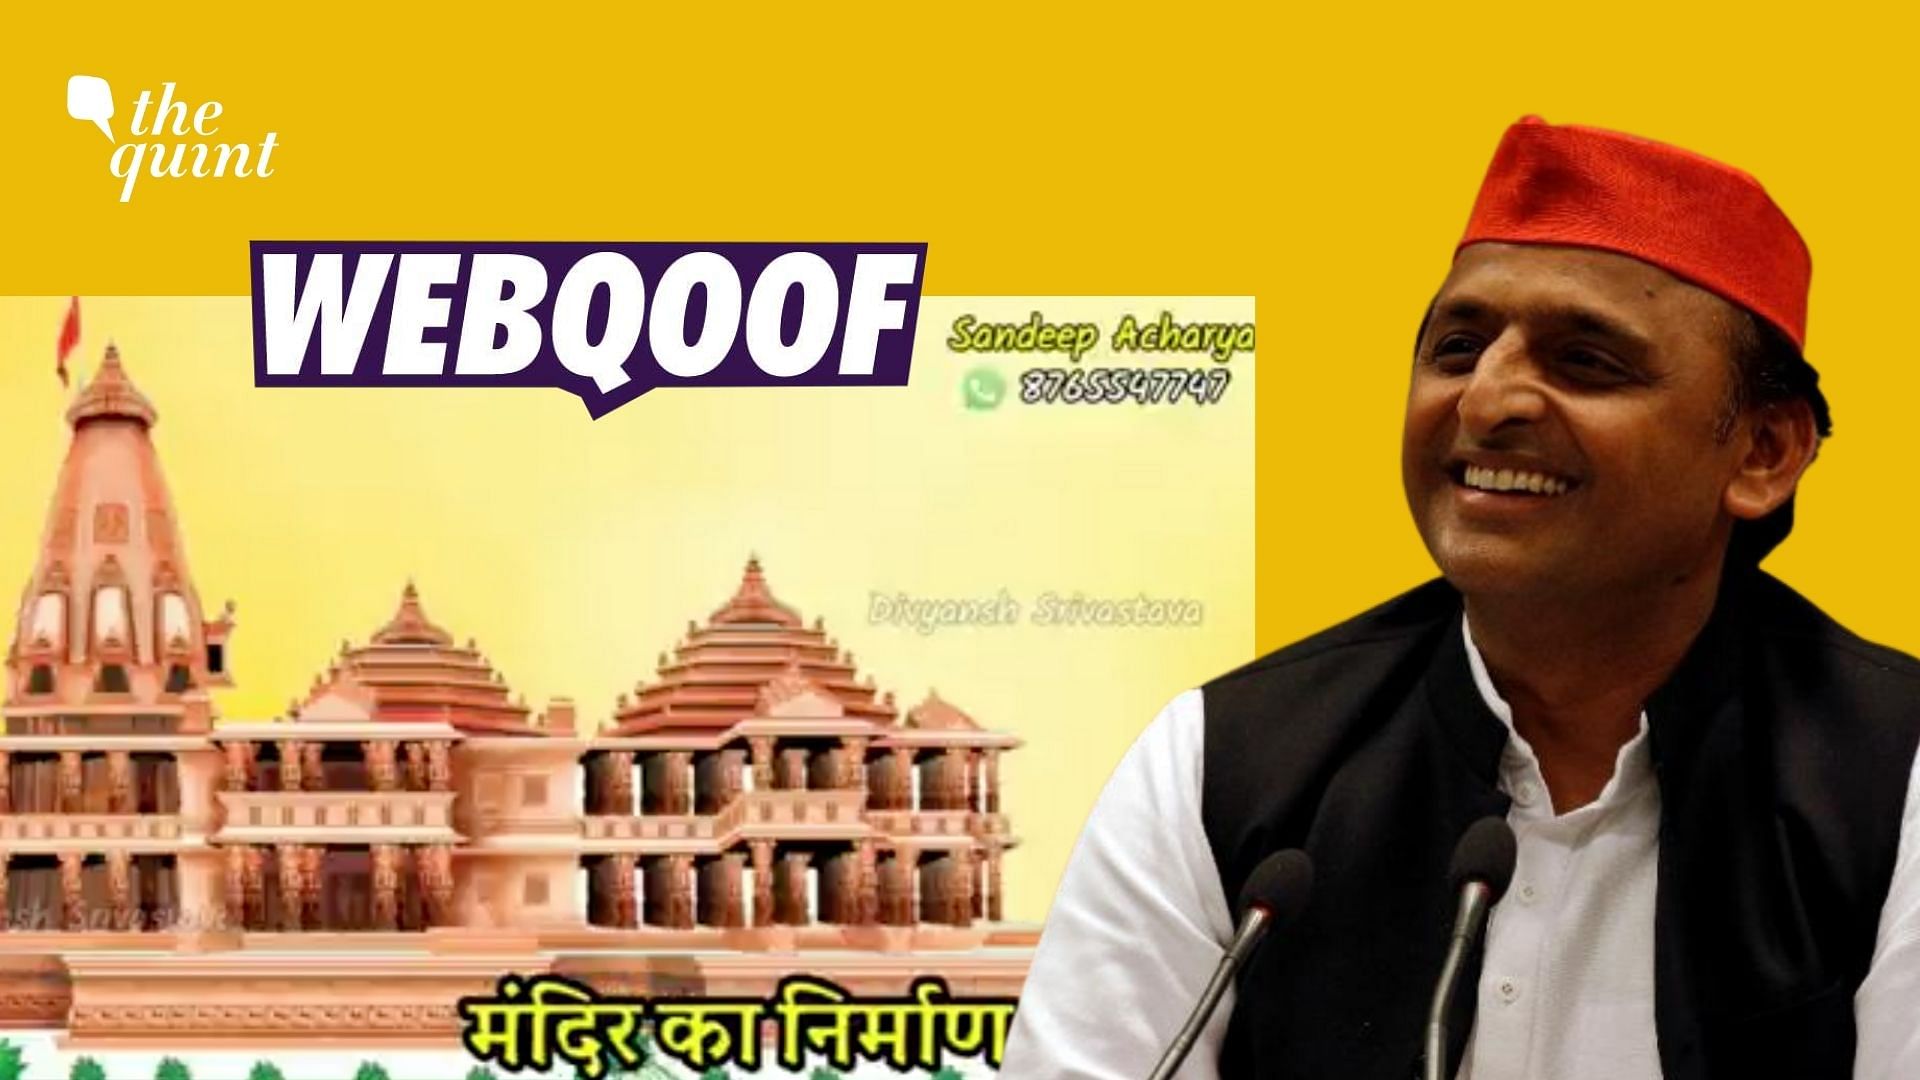 <div class="paragraphs"><p>A part of a video of a pro-Hindu song targeting the Samajwadi Party was shared by social media users to falsely claim that it was composed by people belonging to the minority community.</p></div>